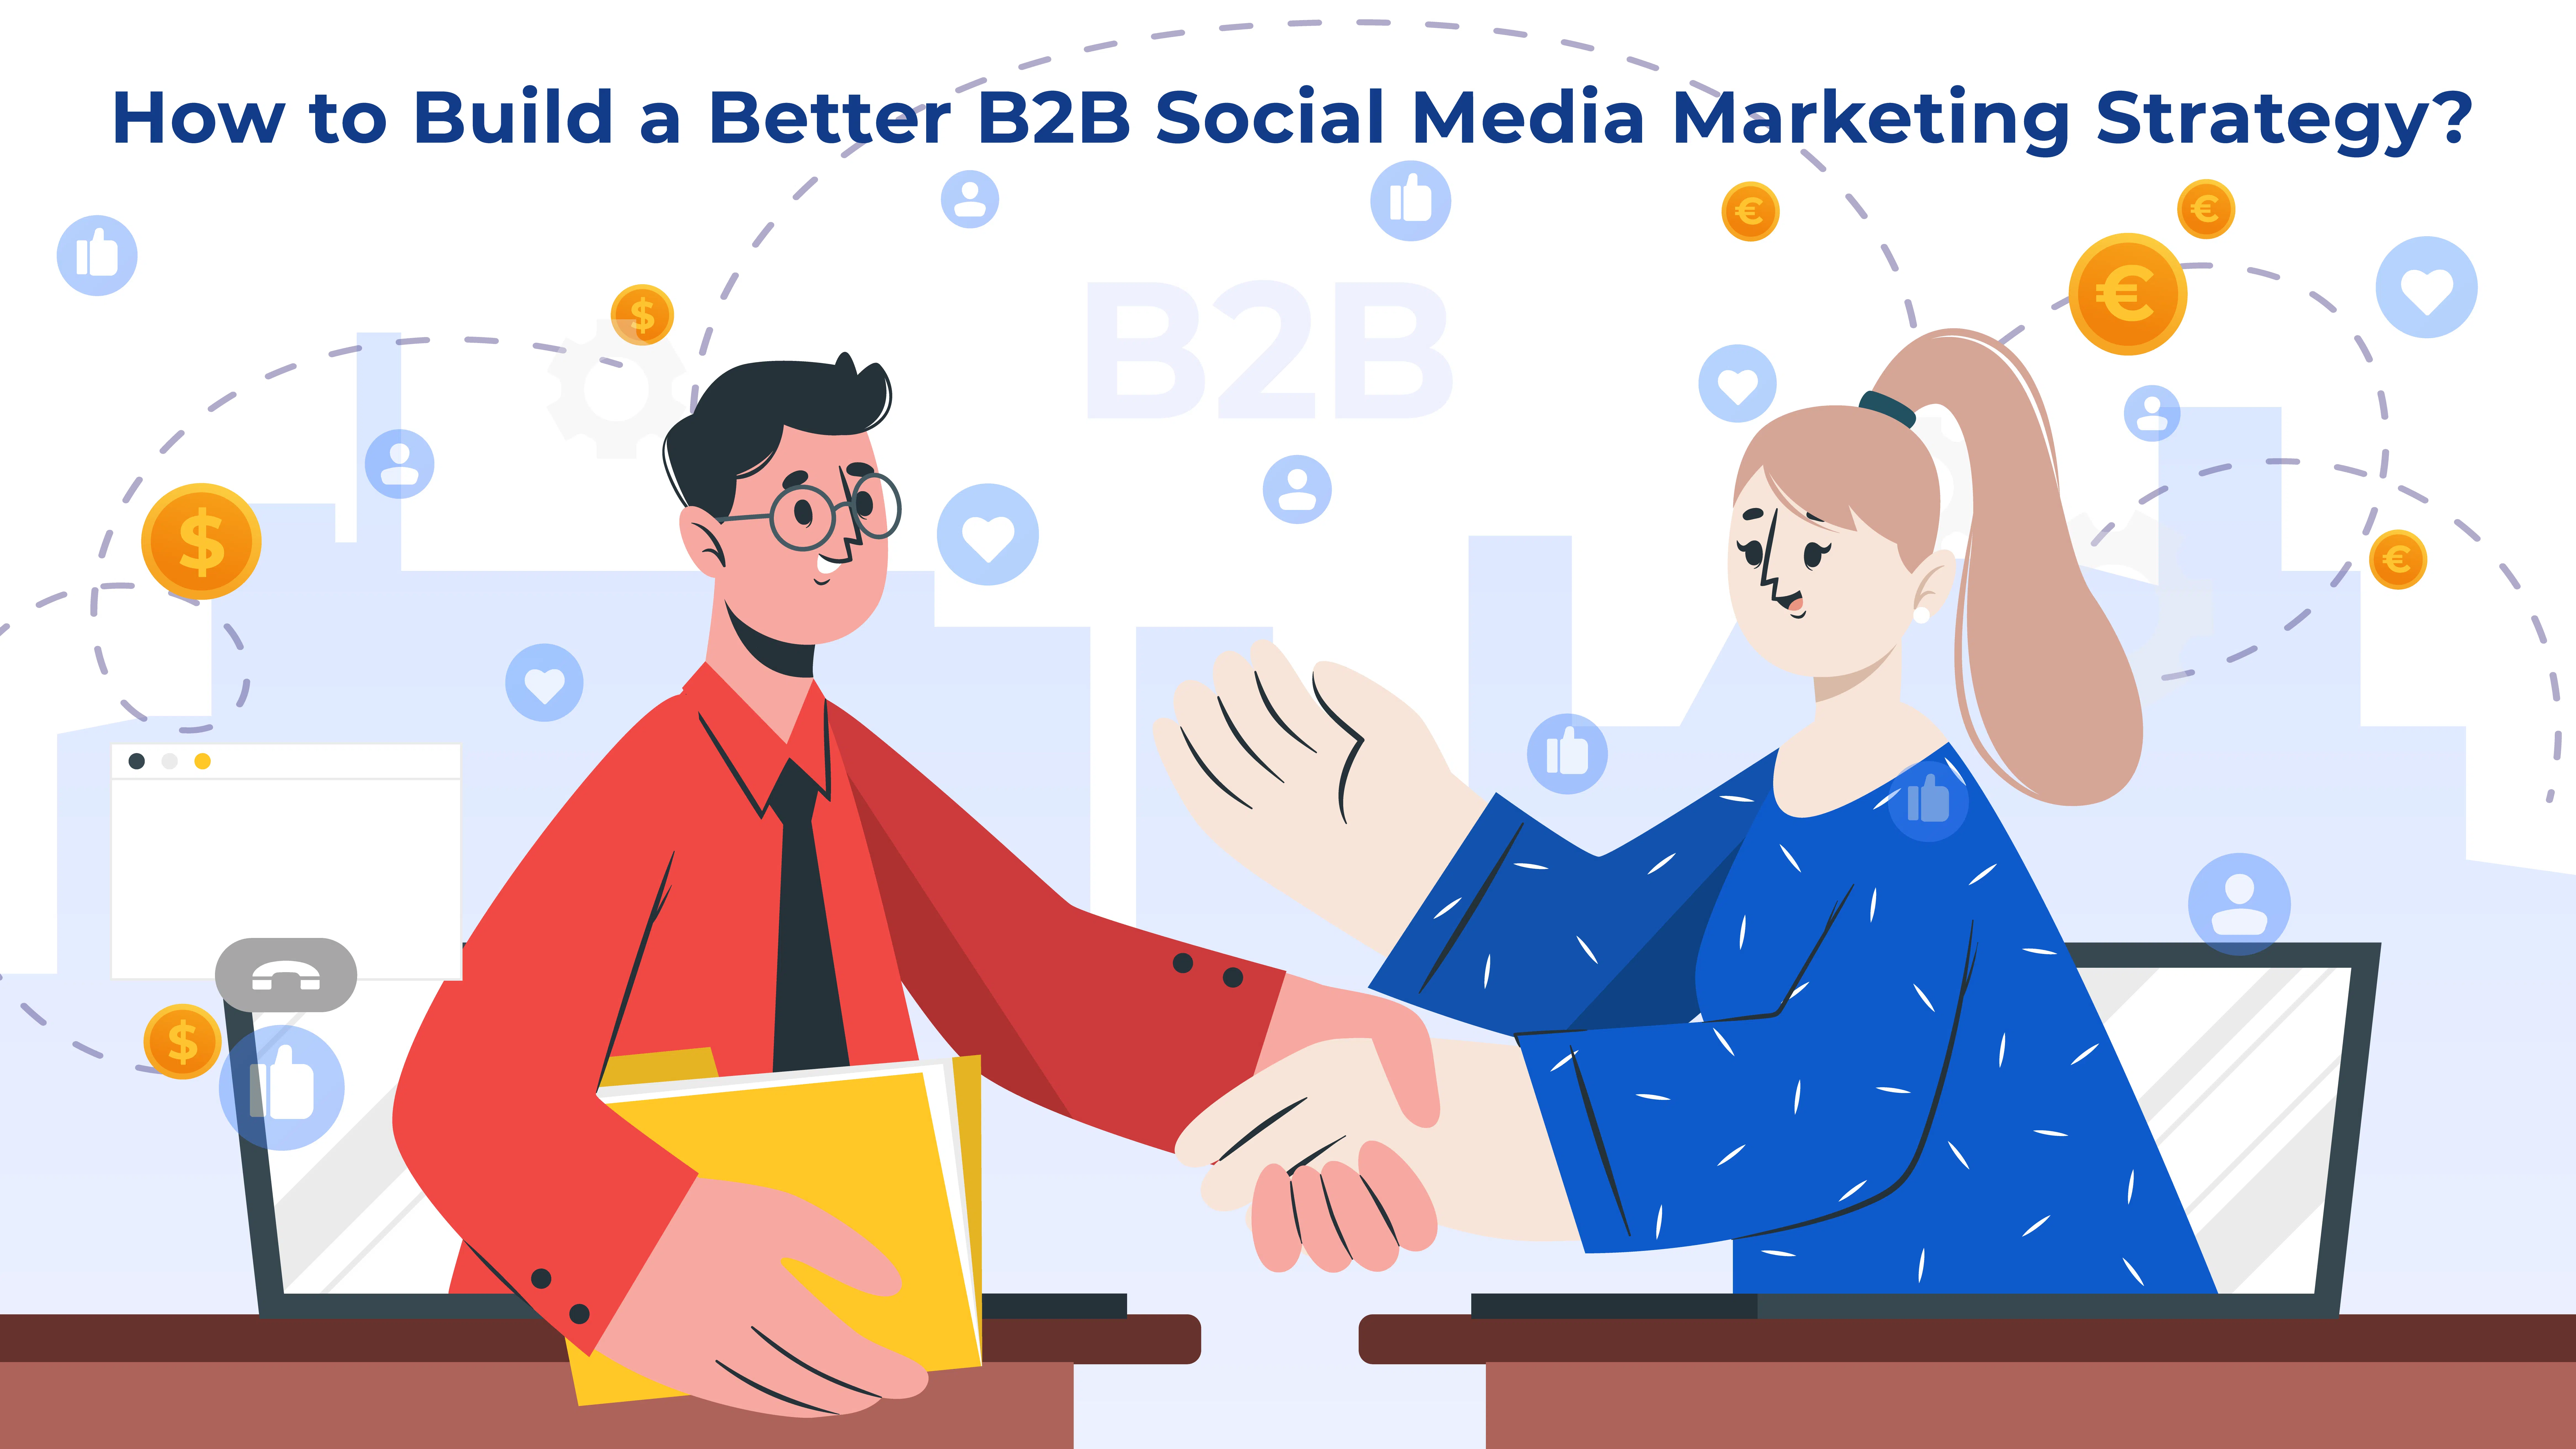 How to Build a Better B2B Social Media Marketing Strategy?